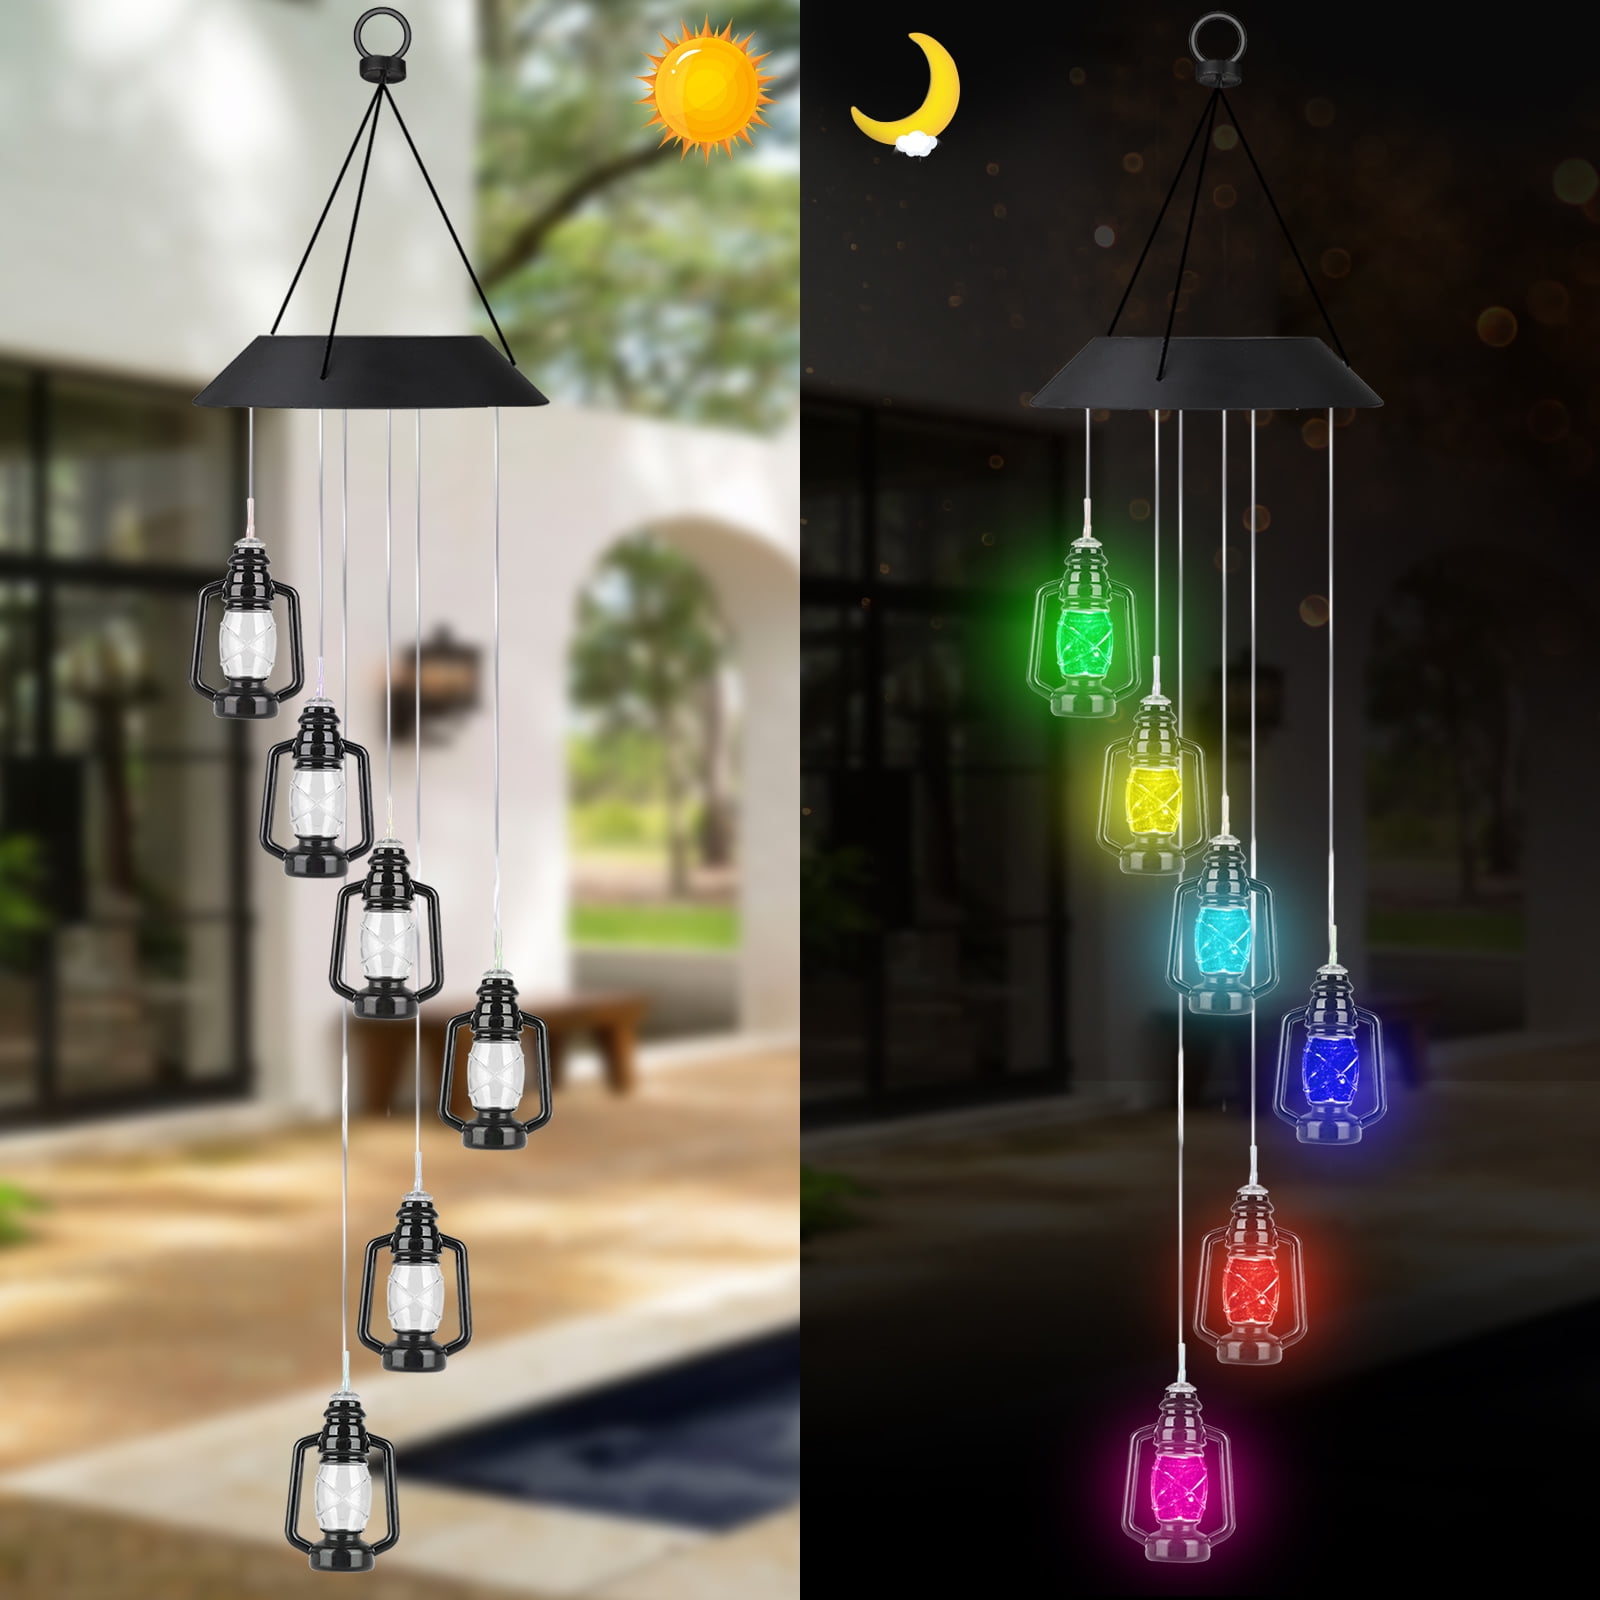 Solar Powered Color Changing Heart Wind Chimes Home Garden Yard Decor Light Lamp 